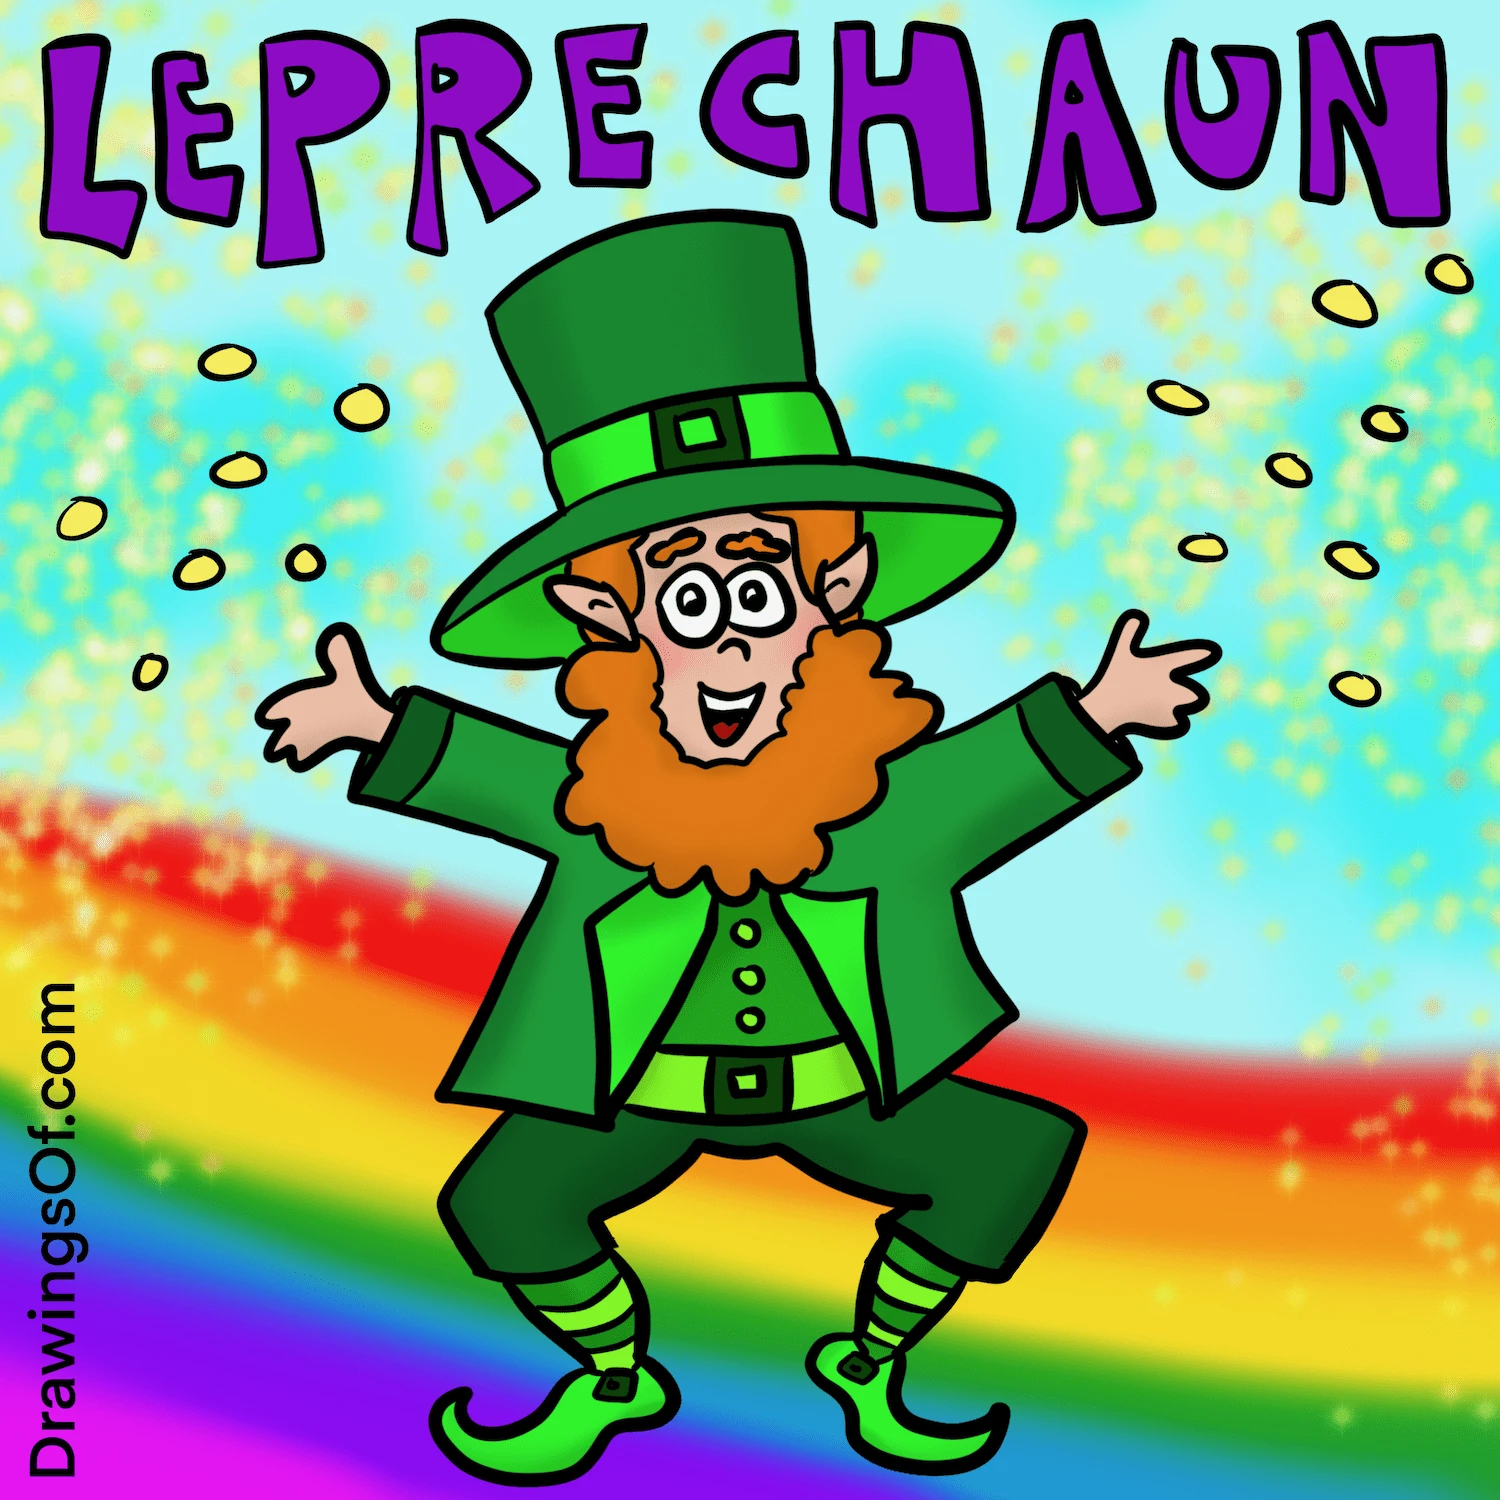 St. Patrick's Day drawings need leprechauns. 